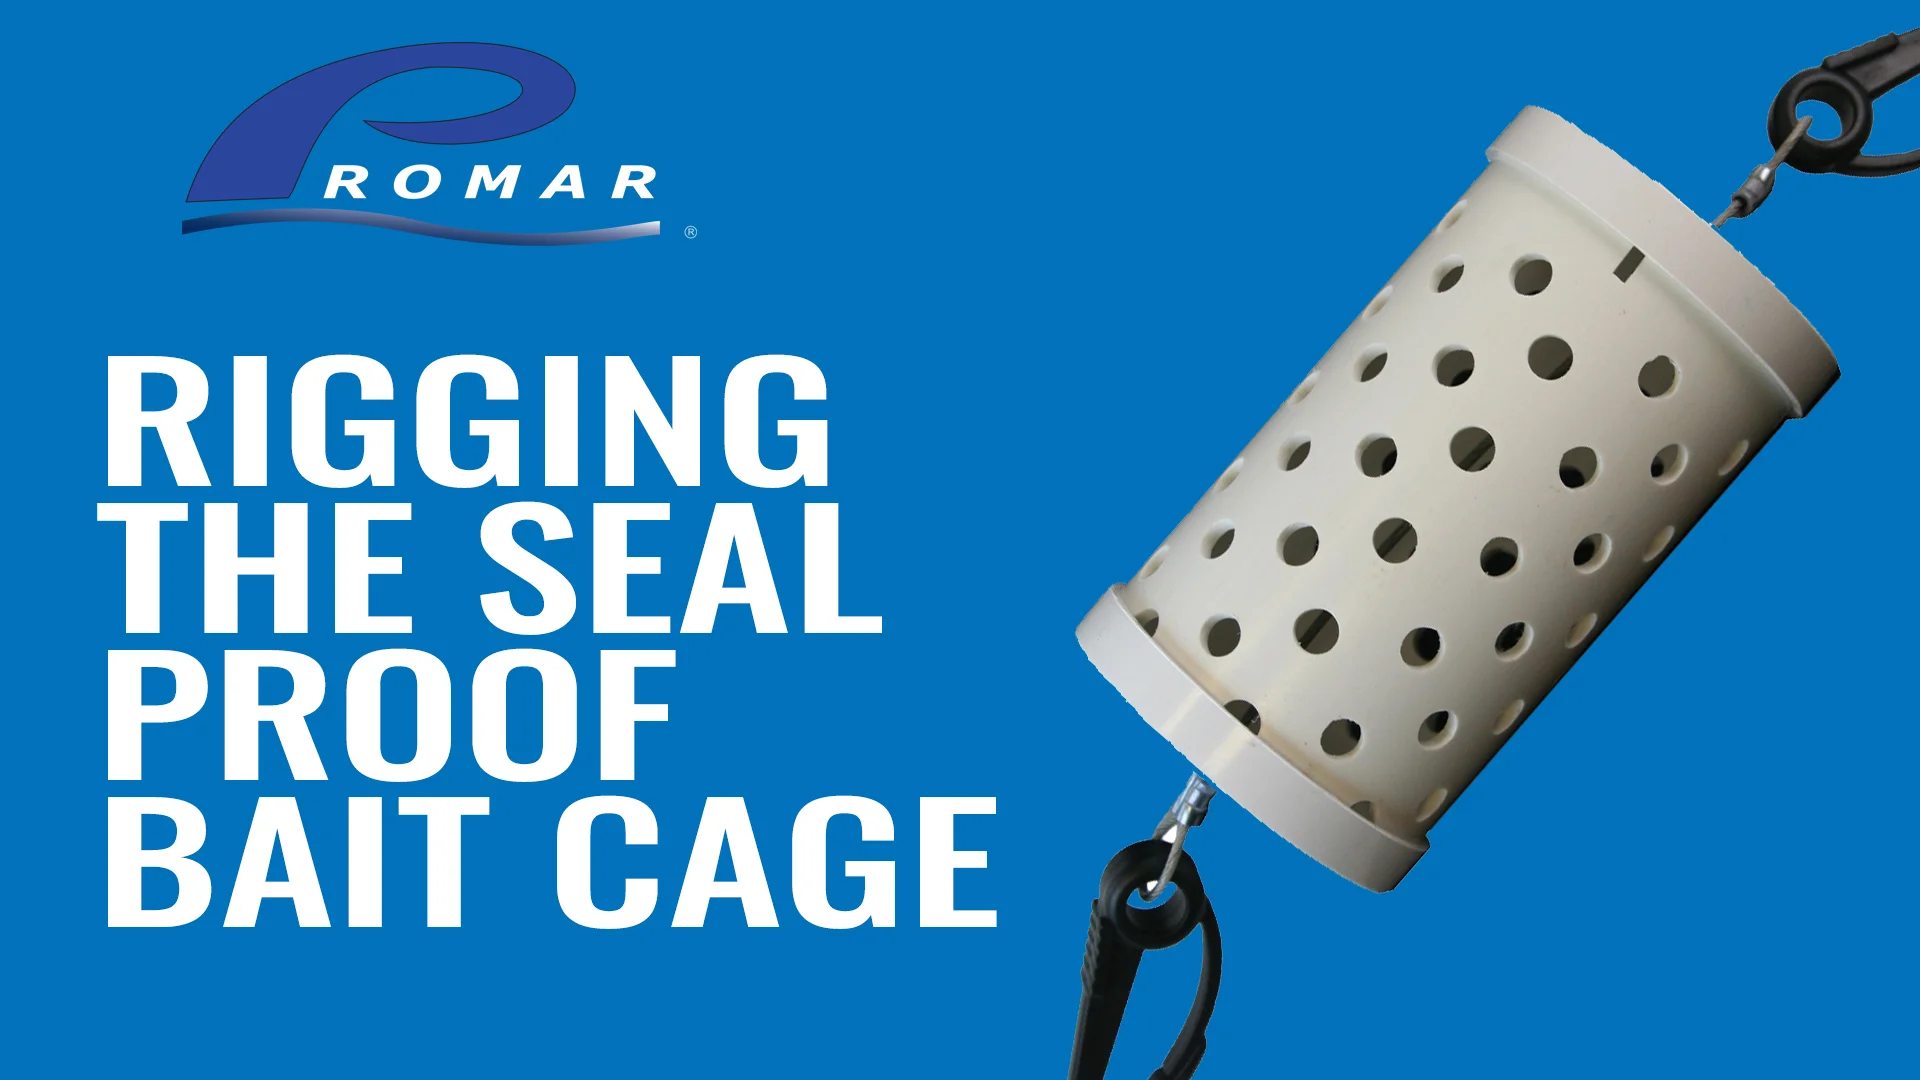 Rigging Promar Seal Proof Bait Cage To Hoop Net on Vimeo